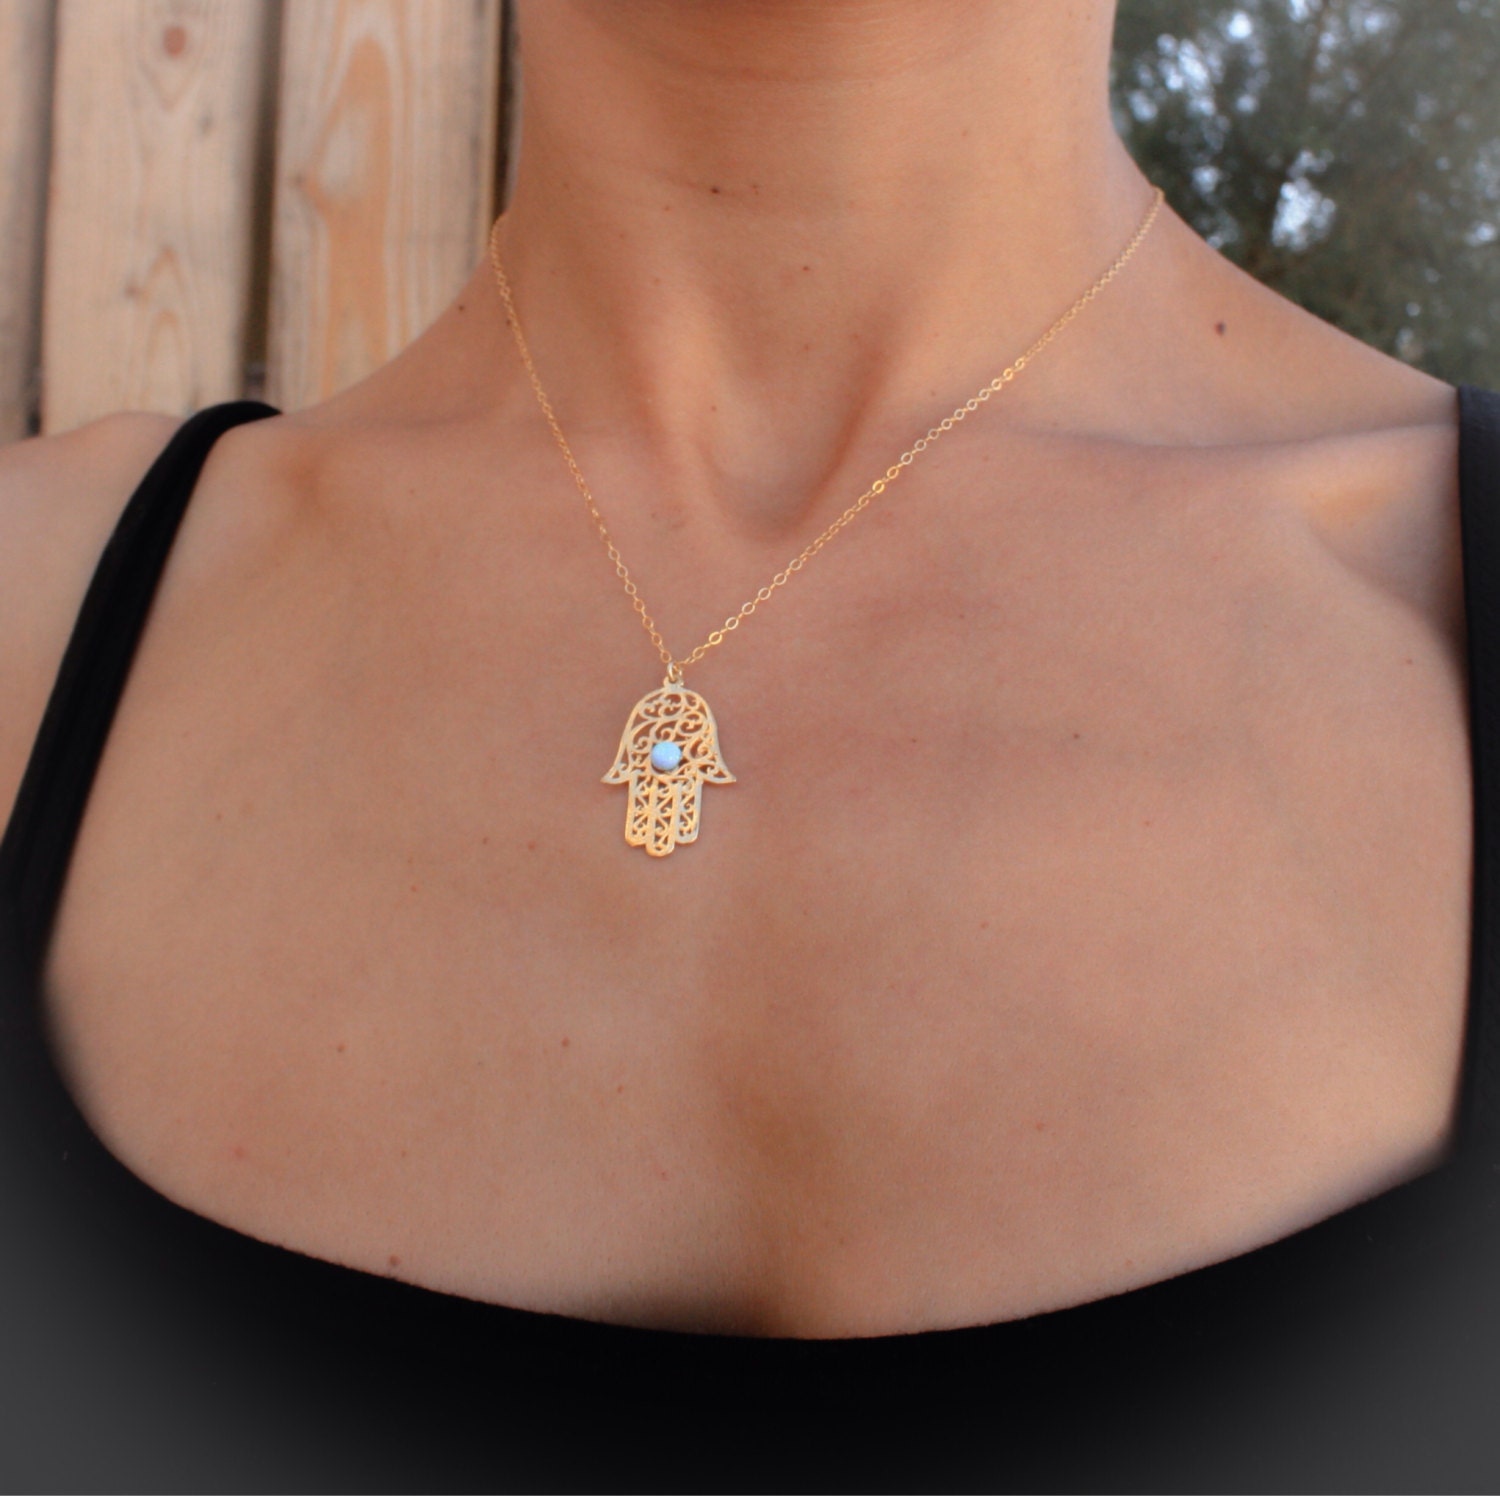 Lily Evil Eye and Hamsa Necklace - Gold Vermeil or Sterling Silver